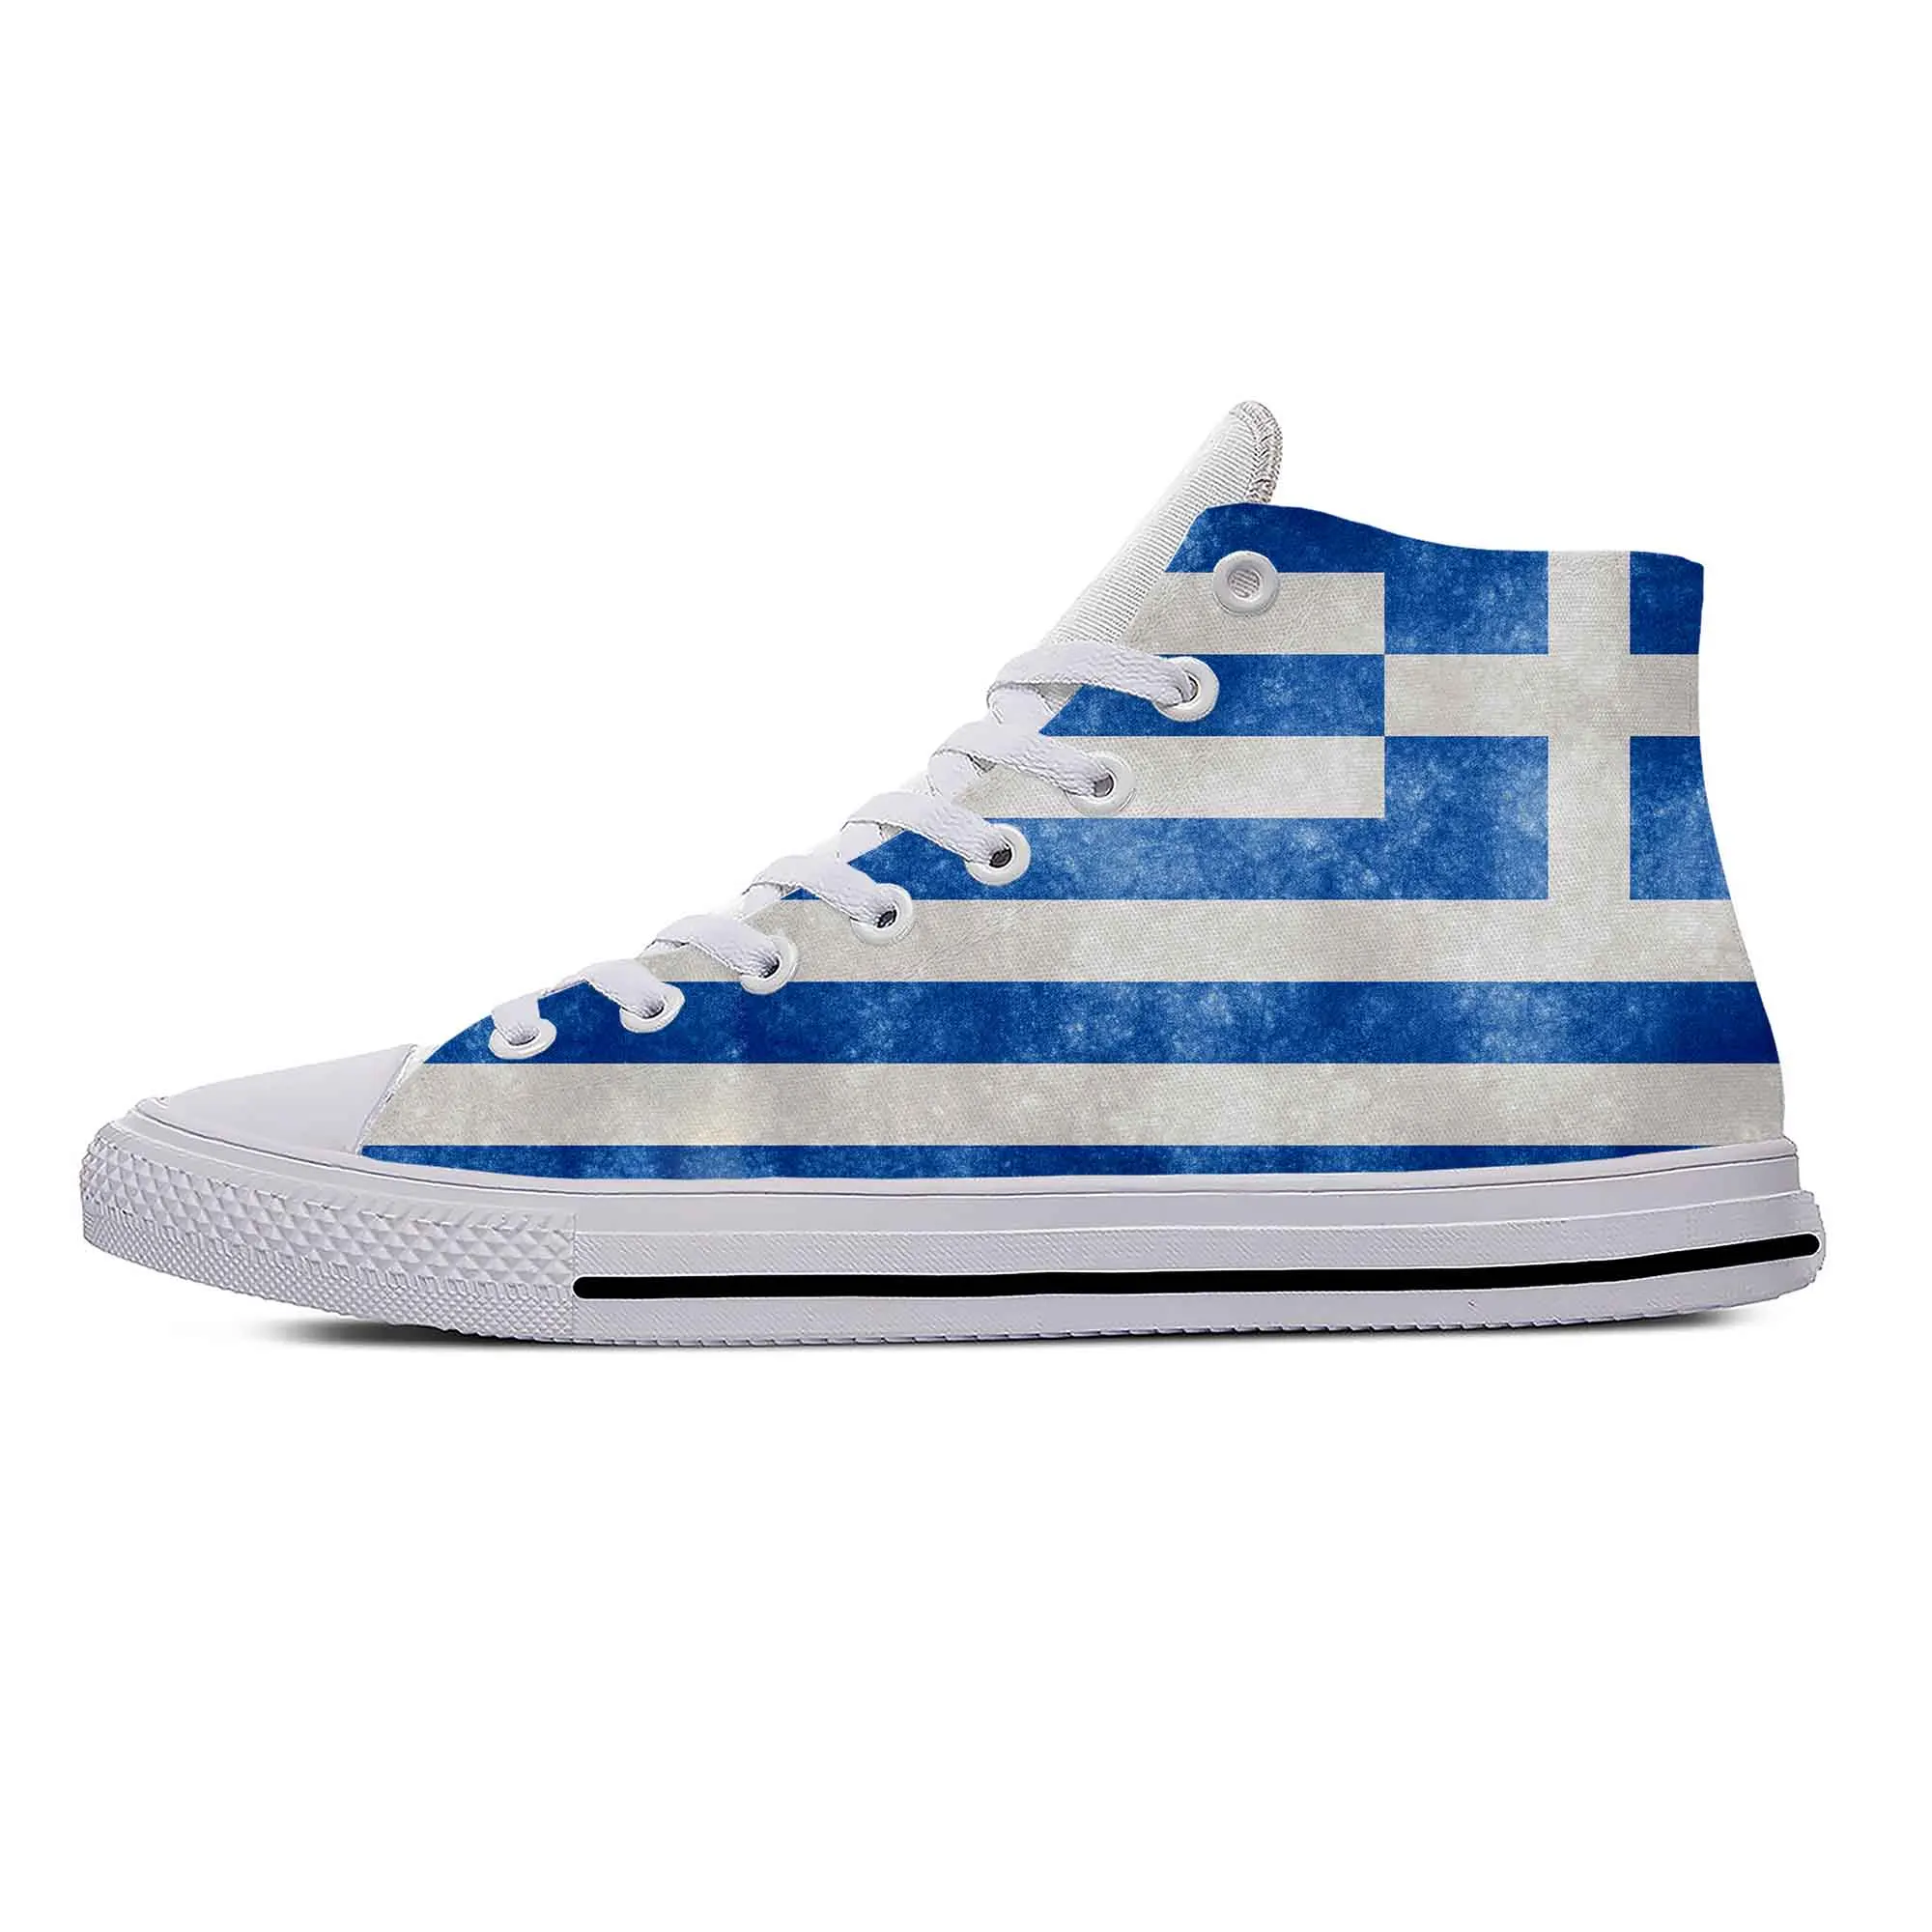 

Hellenic Greek Greece Flag Patriotic Cool Fashion Casual Shoes High Top Lightweight Men Women Sneakers Breathable Board Shoes